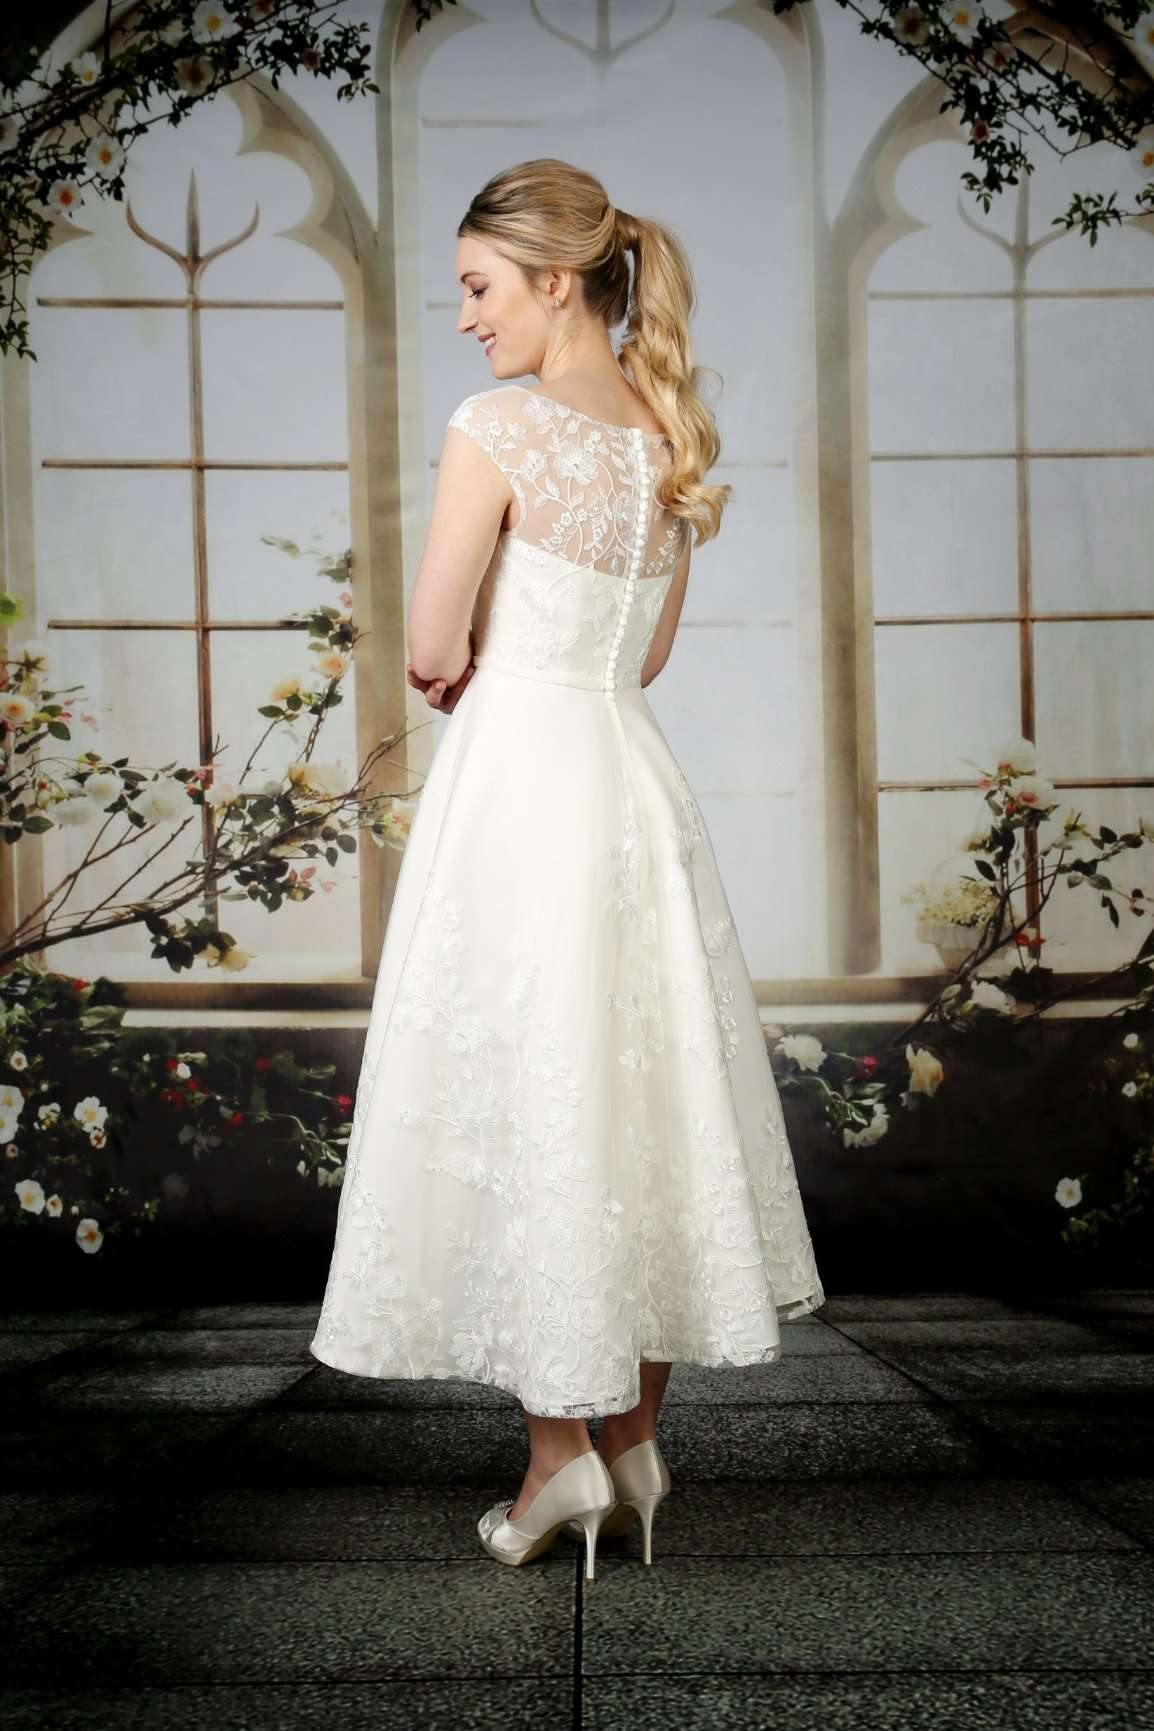 NIEVE COUTURE - Molly - Adore Bridal and Occasion Wear